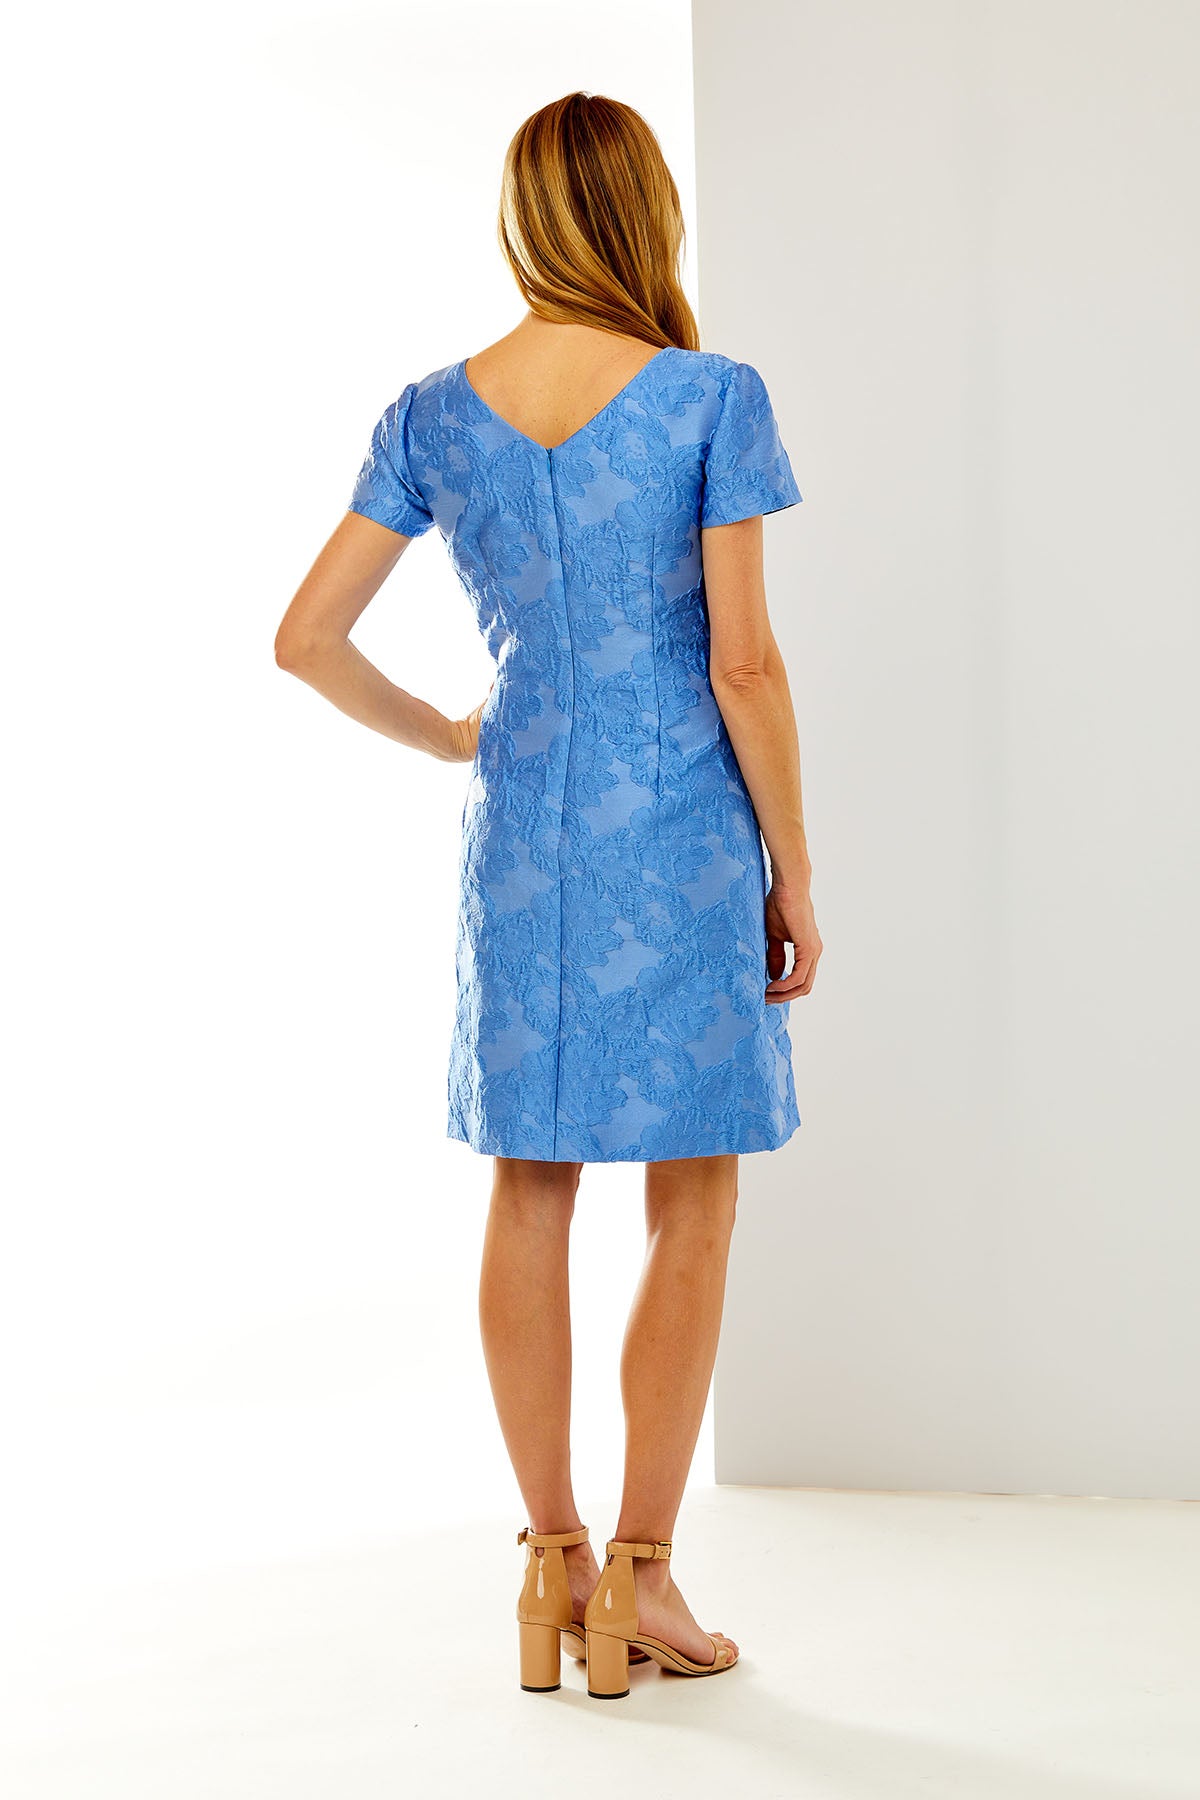 Woman in blue dress with bow